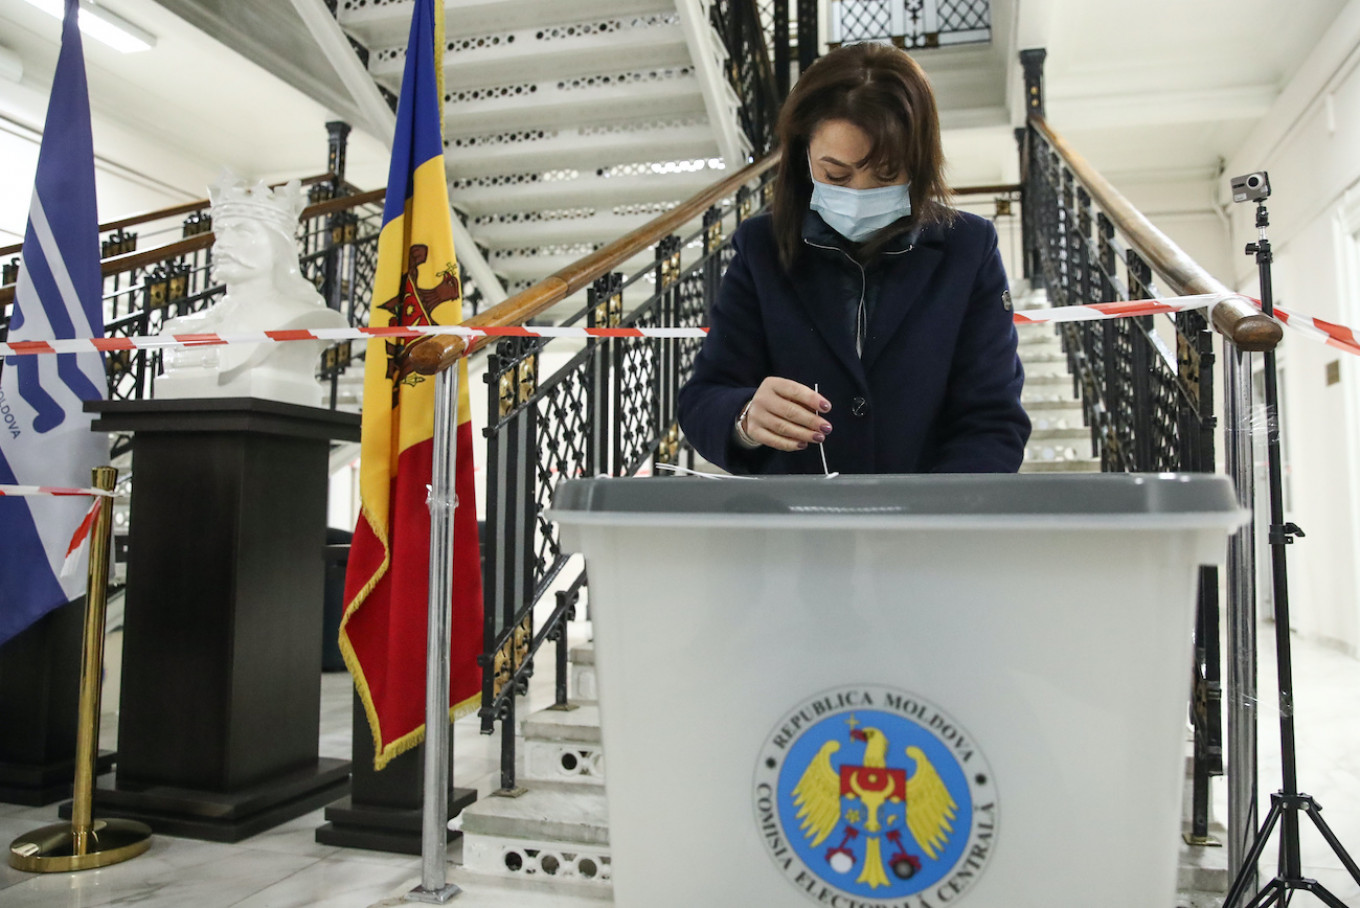 Moldova Torn Between Russia and West in Presidential Runoff